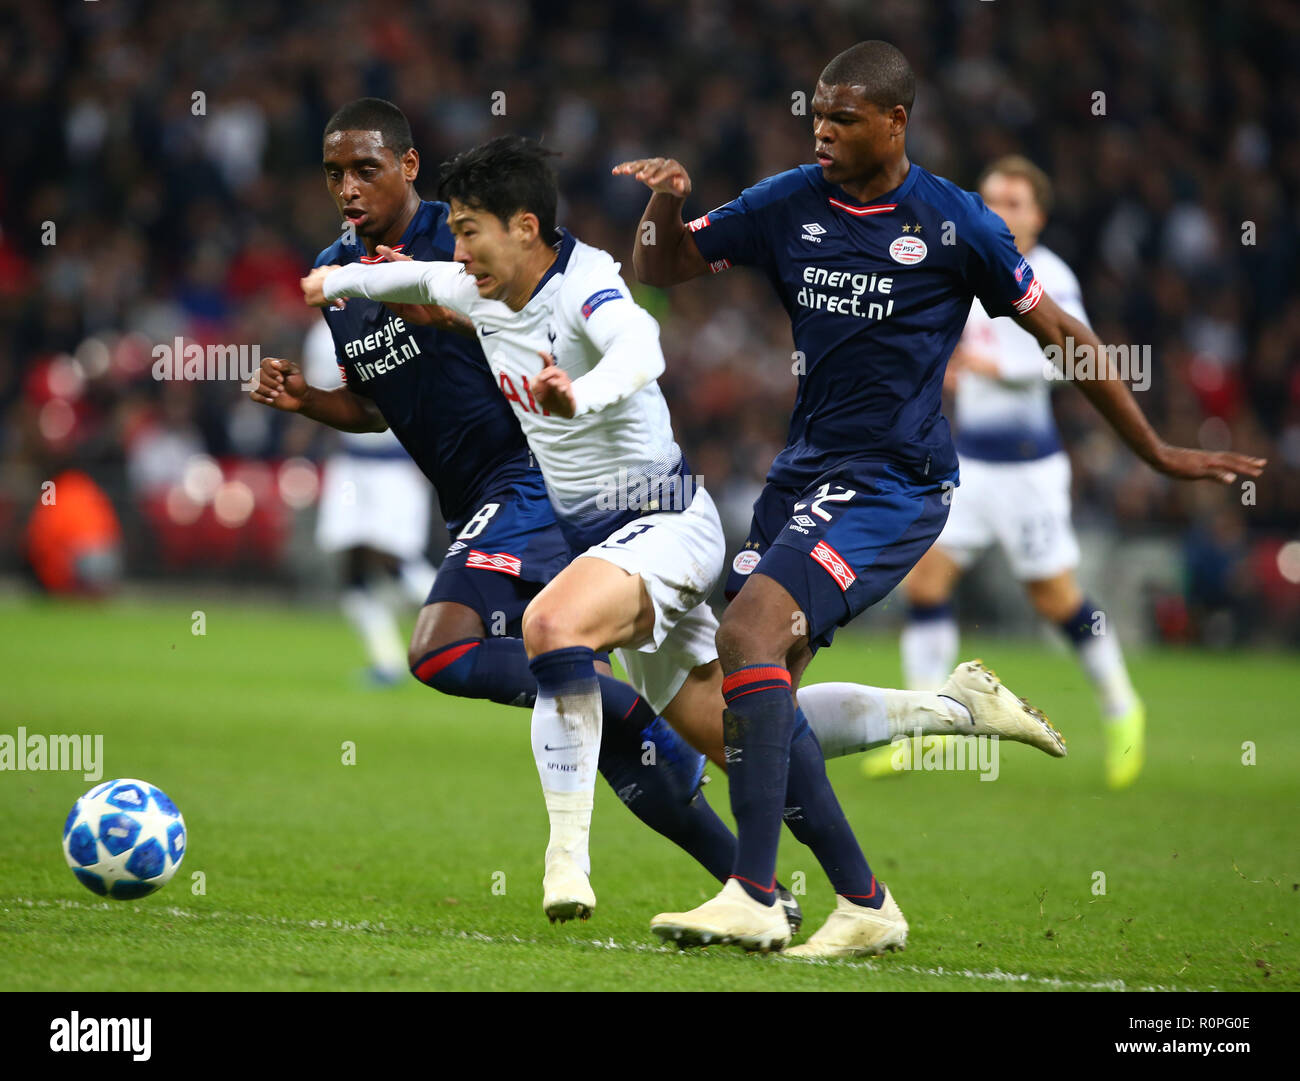 London, England, 06th November 2018.  Tottenham Hotspur's Son Heung-Min go through Pablo Rosario of PSV Eindhoven and Denzel Dumfries of PSV Eindhoven during Champion League Group B between Tottenham Hotspur and PSV Eindhoven at Wembley stadium , London, England on 06 Nov 2018. Credit Action Foto Sport  FA Premier League and Football League images are subject to DataCo Licence. Editorial use ONLY. No print sales. No personal use sales. NO UNPAID USE Credit: Action Foto Sport/Alamy Live News Stock Photo